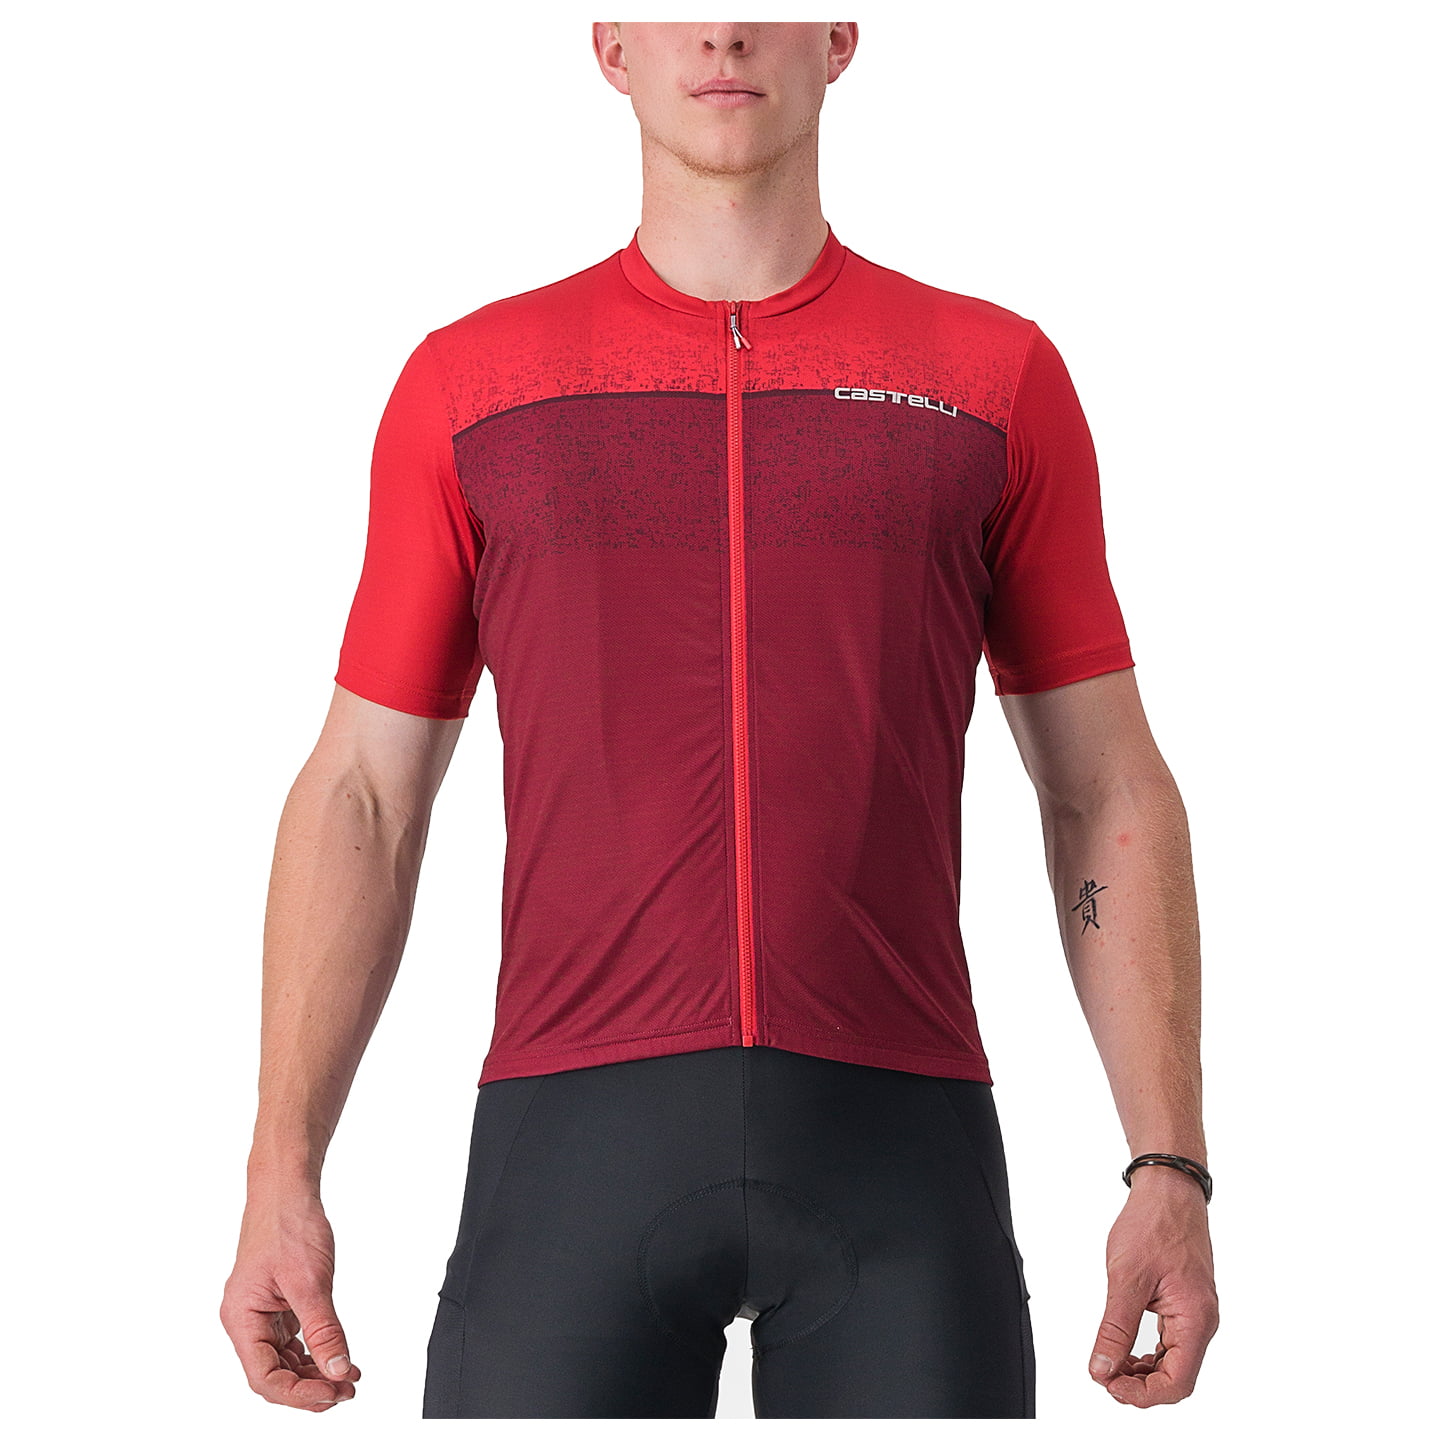 CASTELLI Unlimited Entrata Short Sleeve Jersey Short Sleeve Jersey, for men, size S, Cycling jersey, Cycling clothing